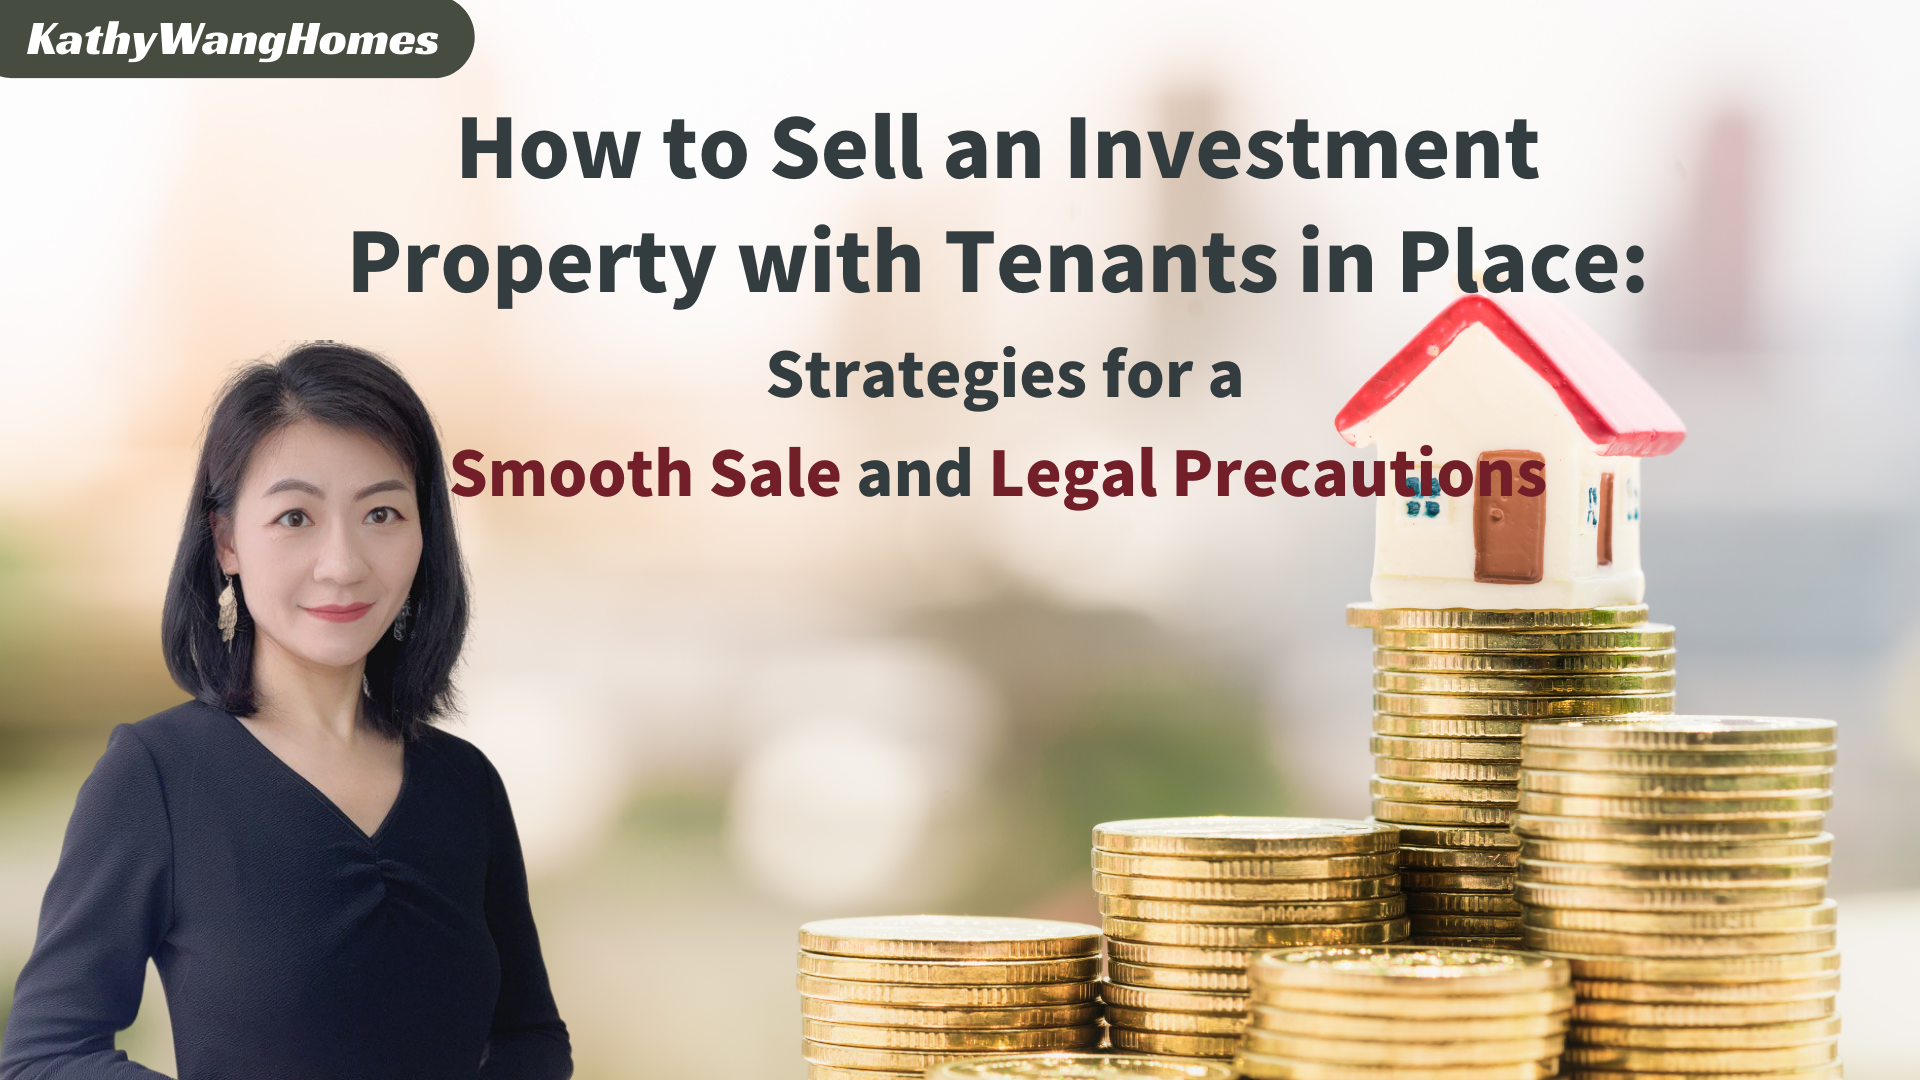 How to Sell an Investment Property with Tenants in Place: Strategies for a Smooth Sale and Legal Precautions